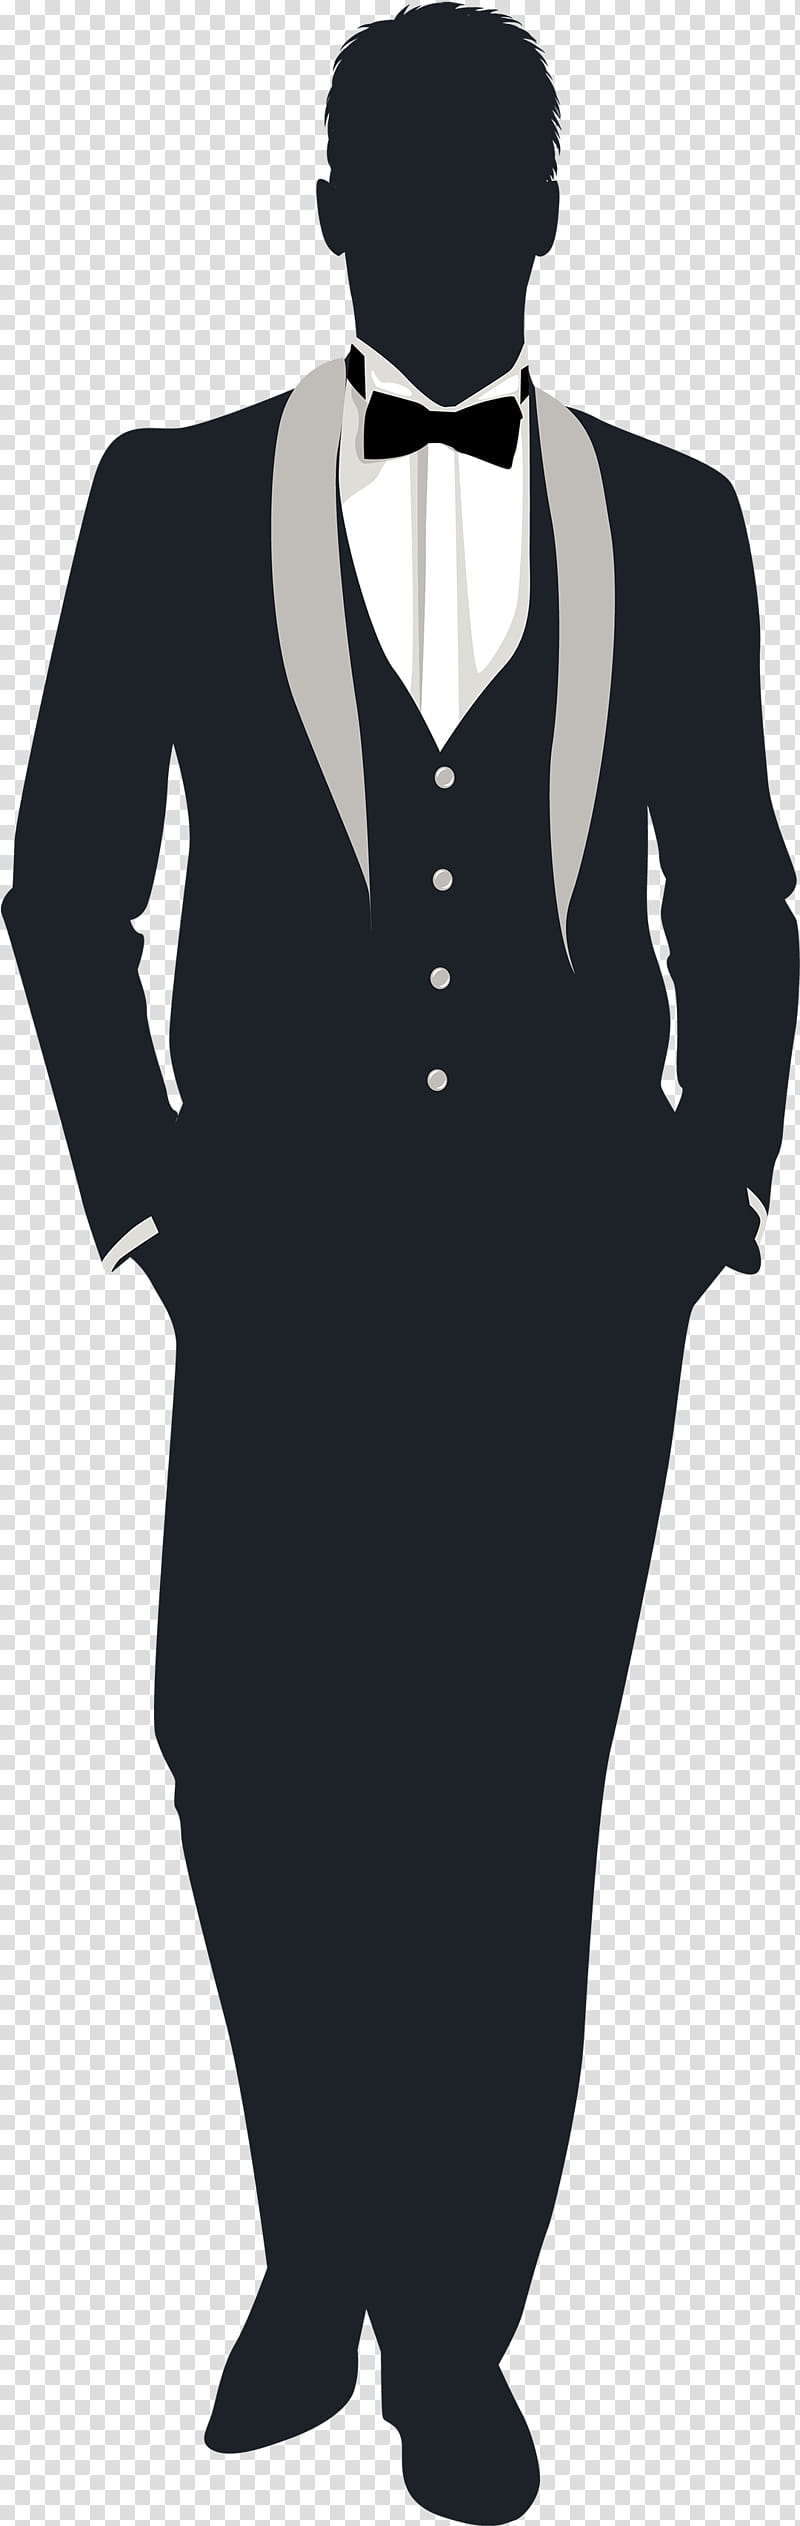 Wedding Silhouette, Bridegroom, Clothing, Black, White, Suit, Formal Wear, Sleeve transparent background PNG clipart